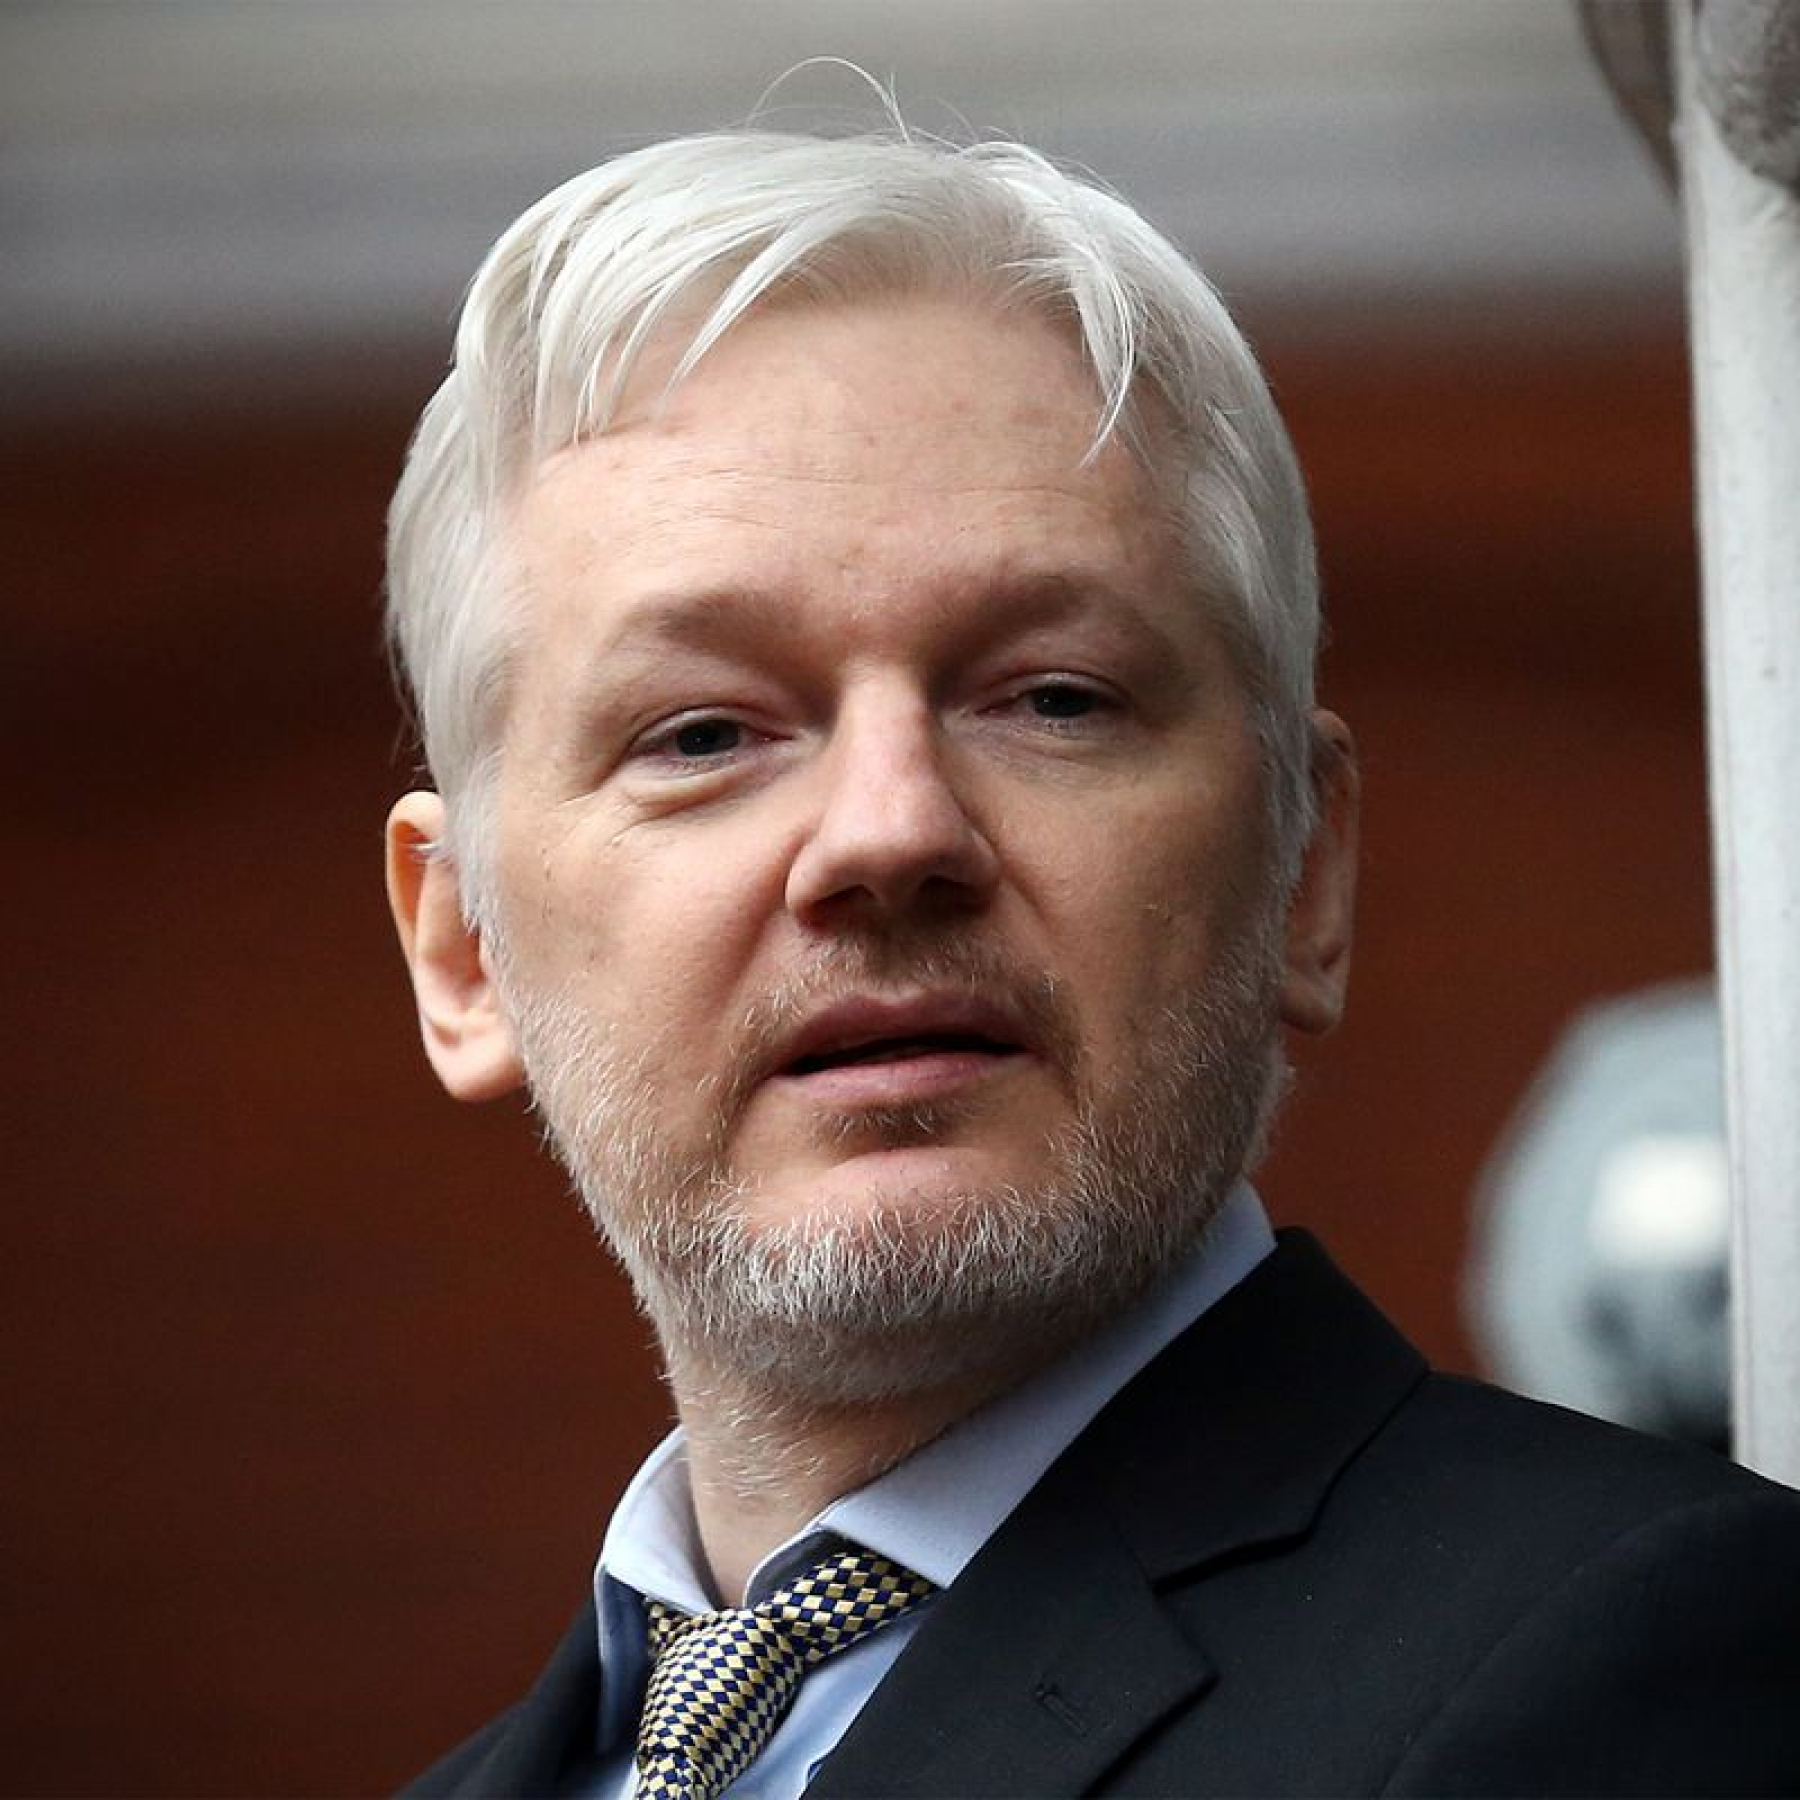 UK government approves Julian Assanges extradition to US Wikileaks says will appeal